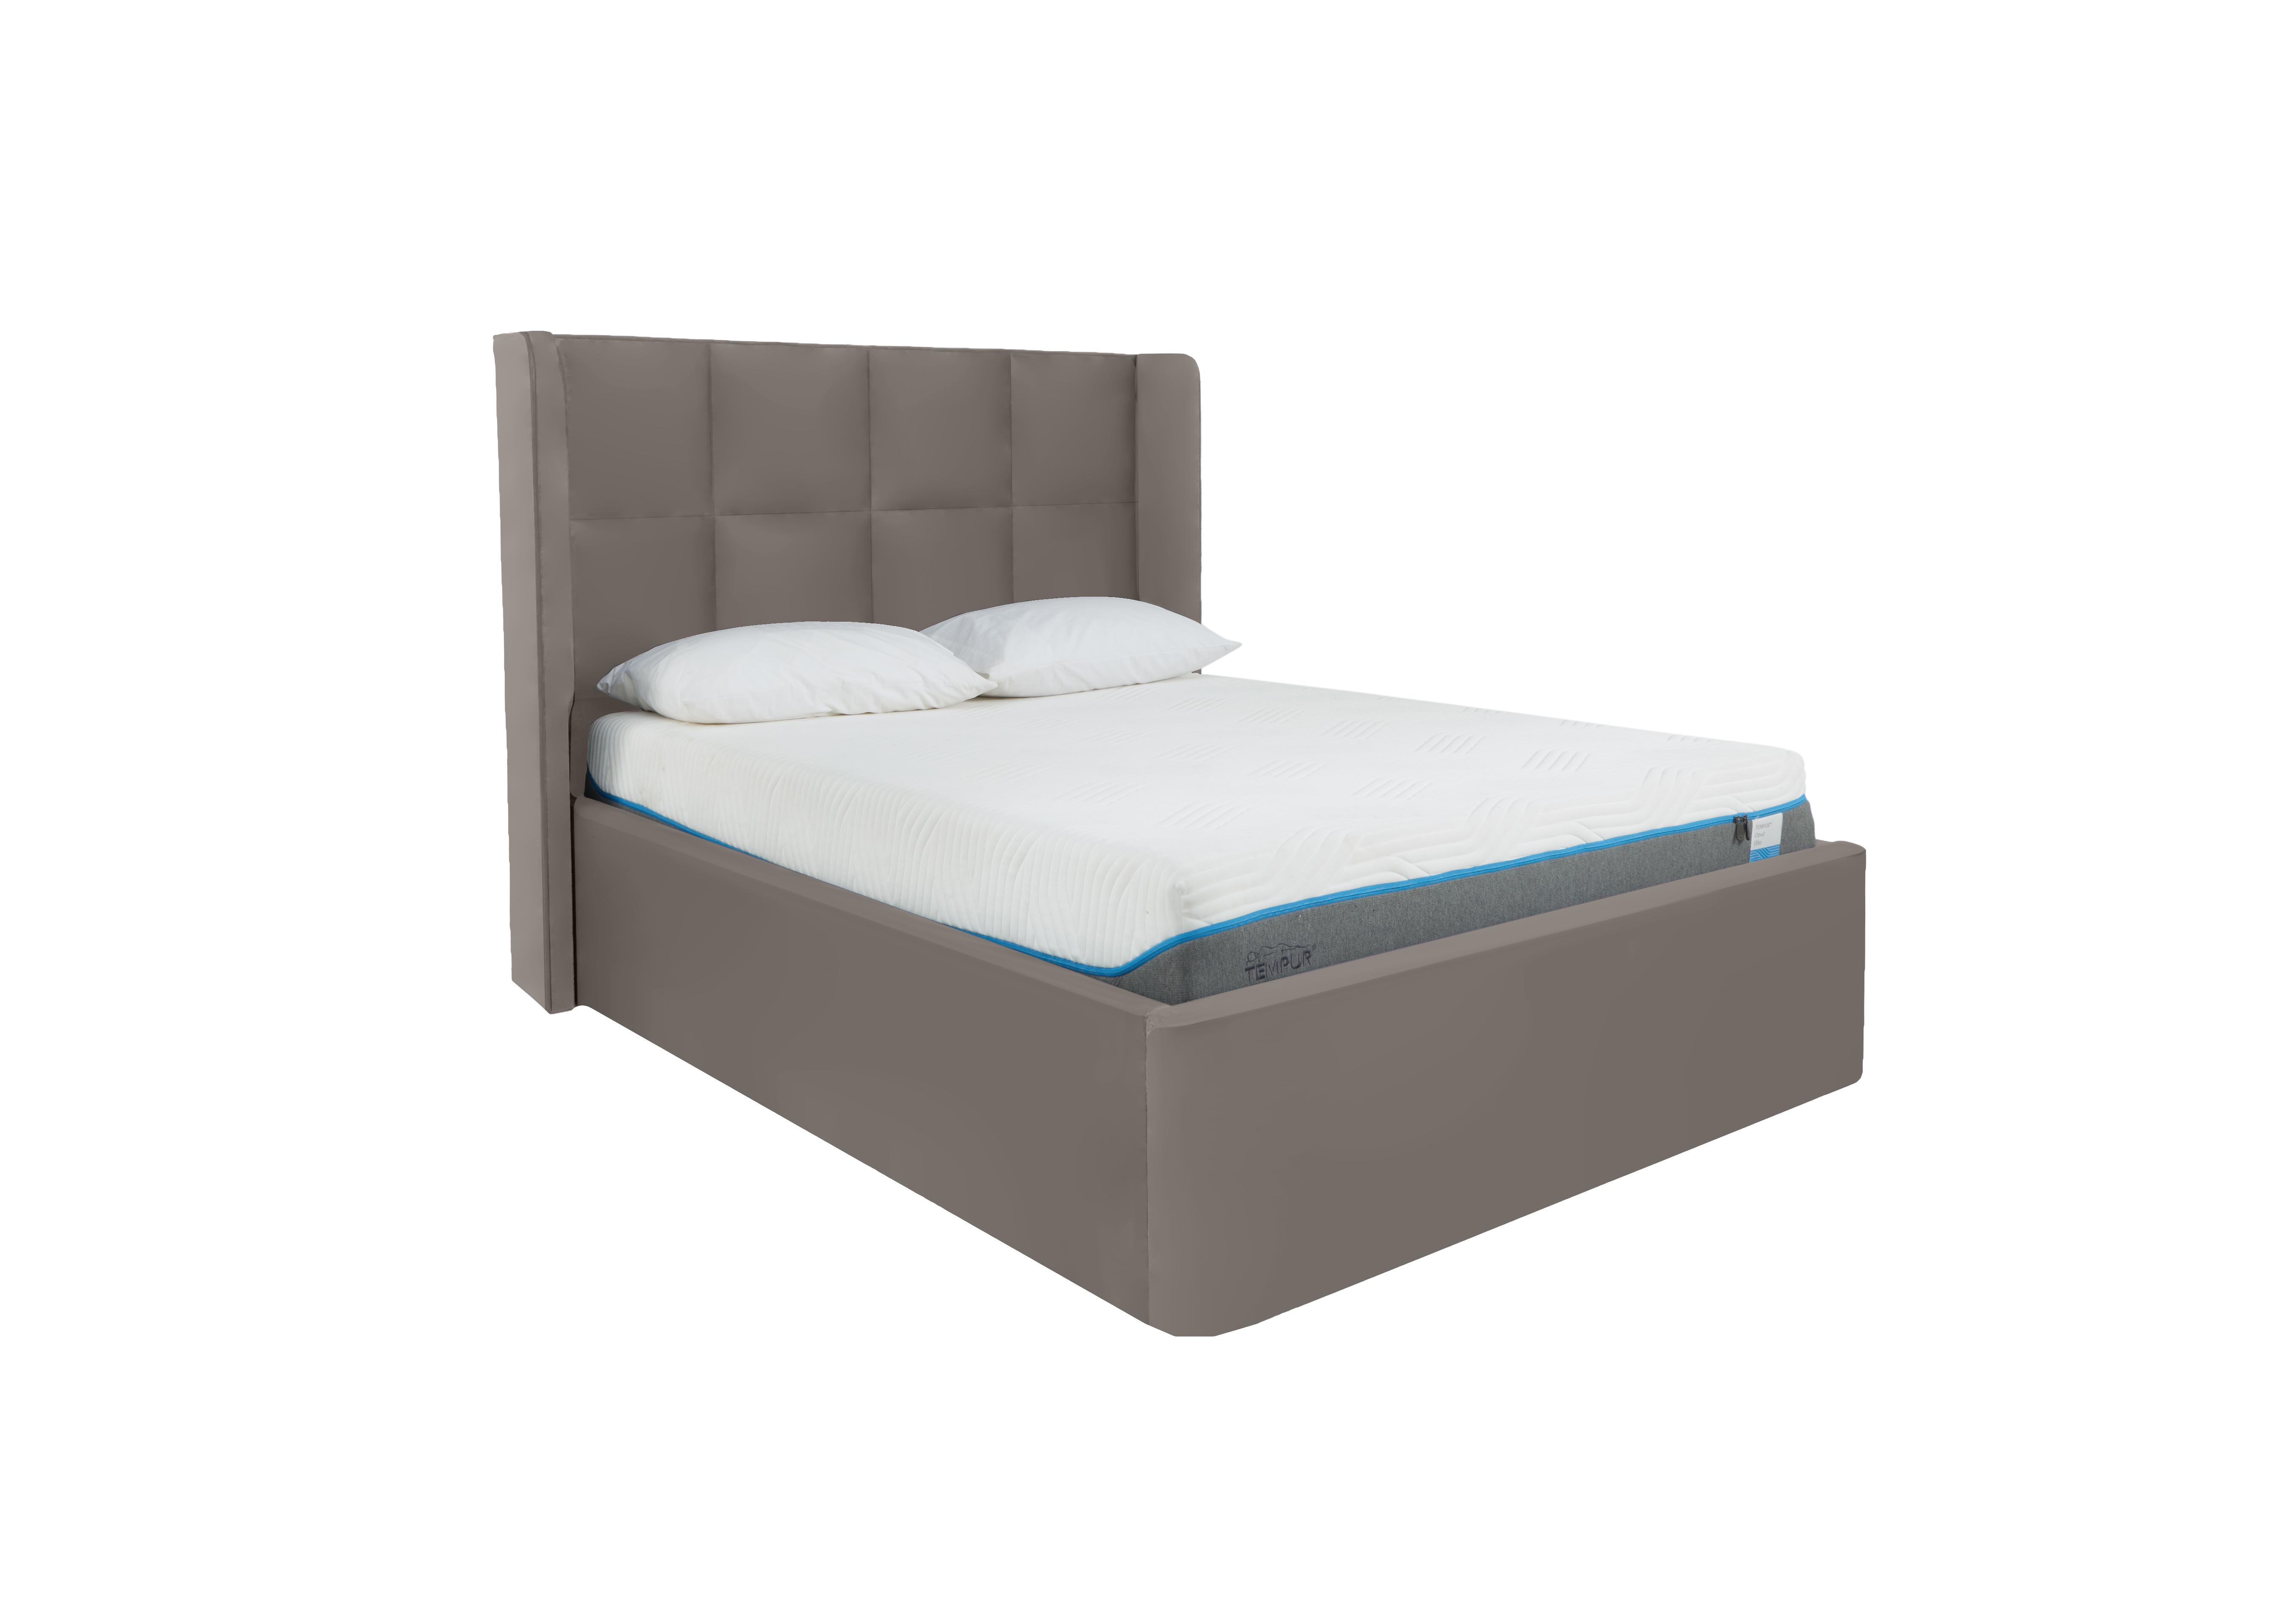 Shiva Bed Frame in Sanderson Potters Clay on Furniture Village